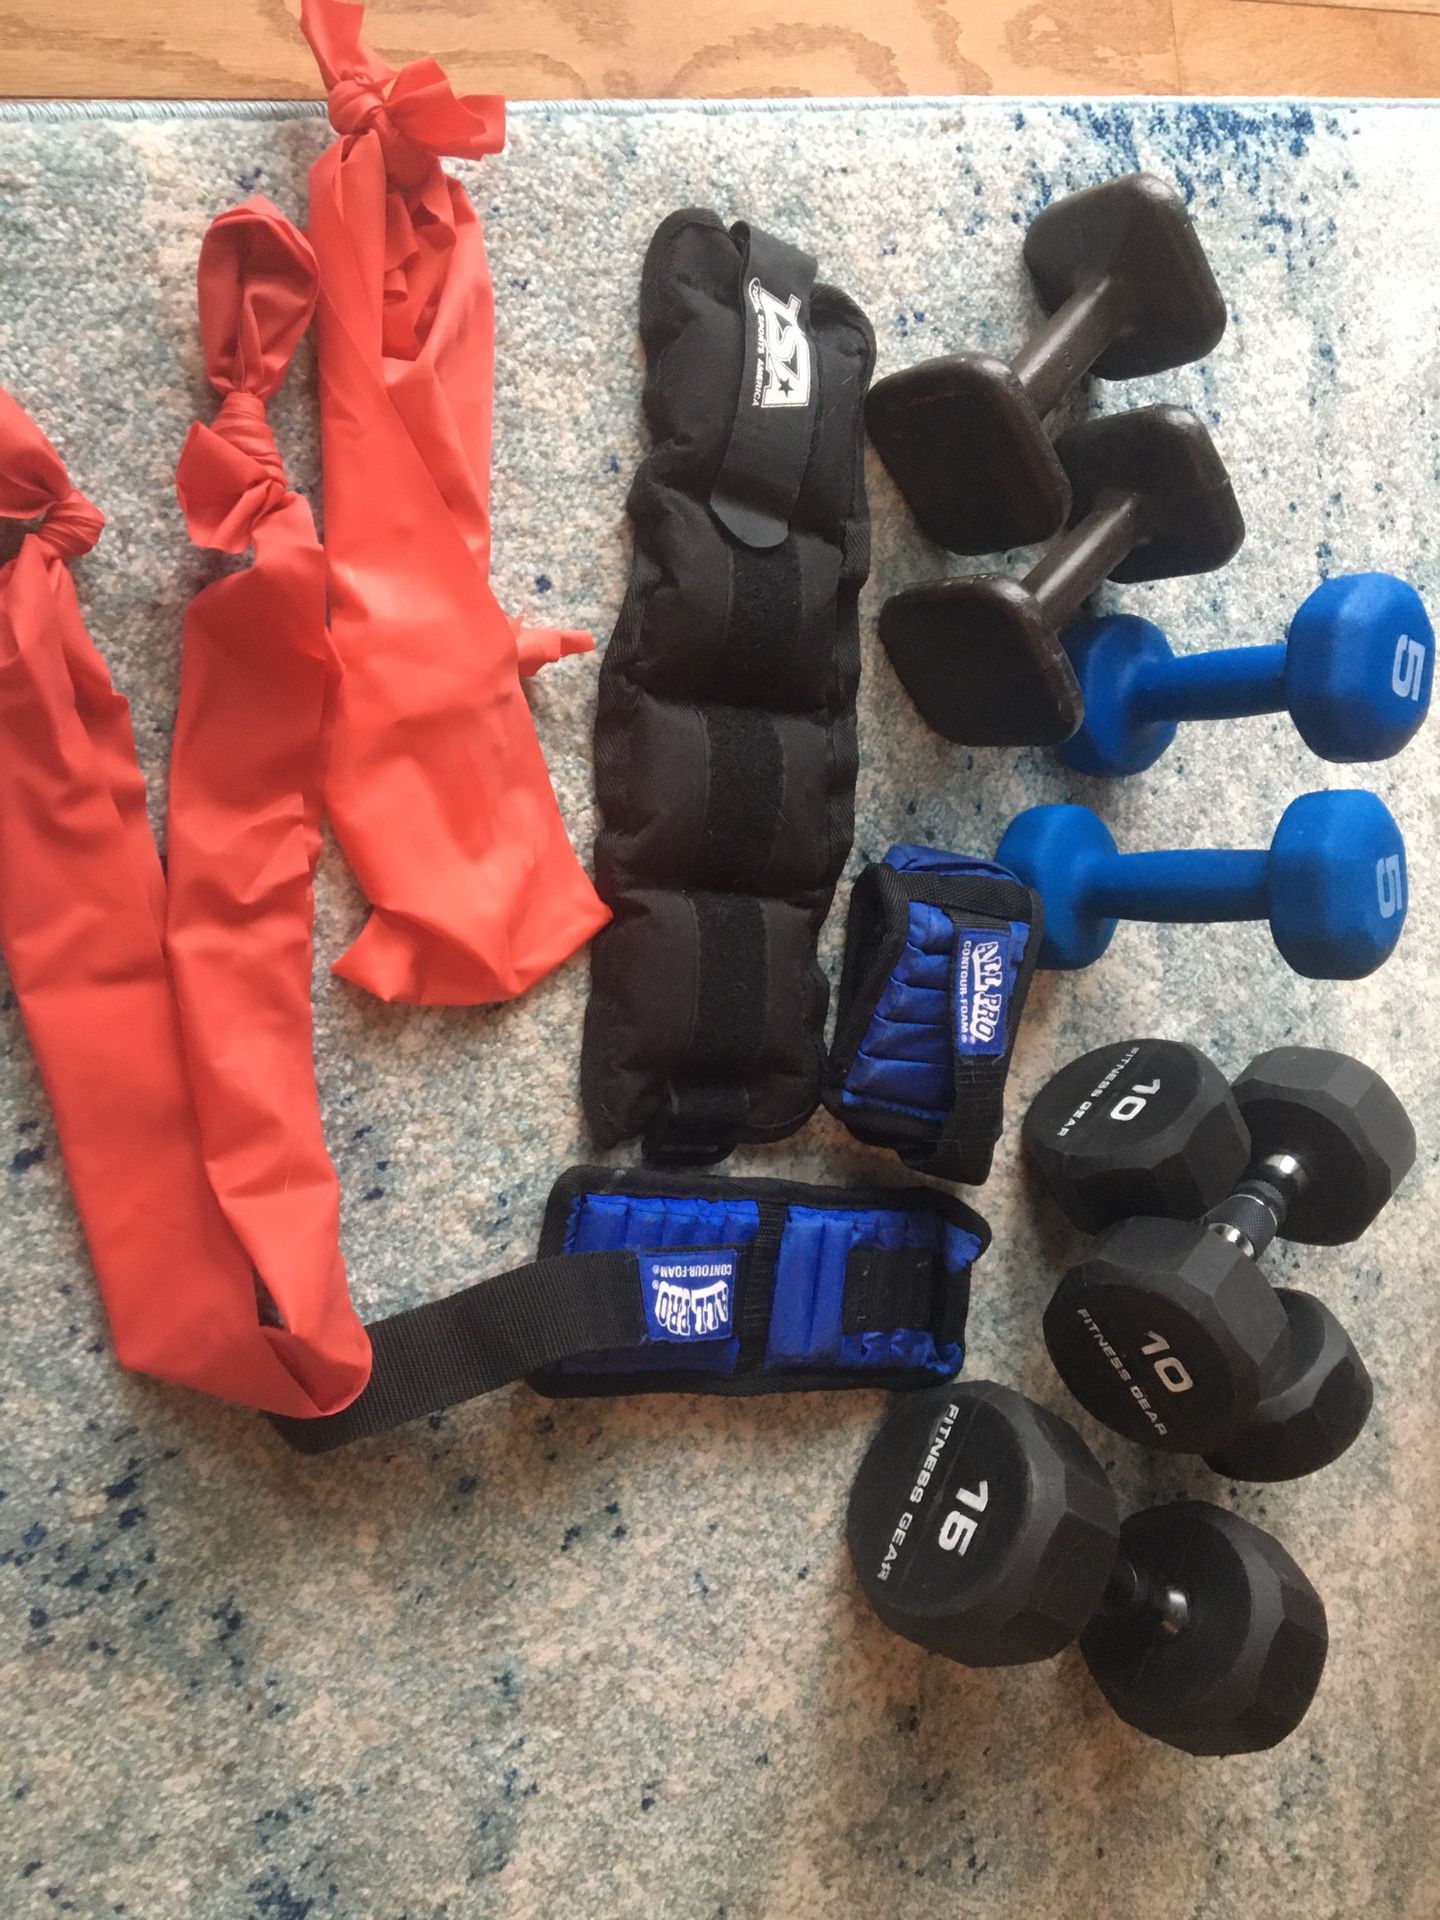 Hand weights, ankle weights and bands